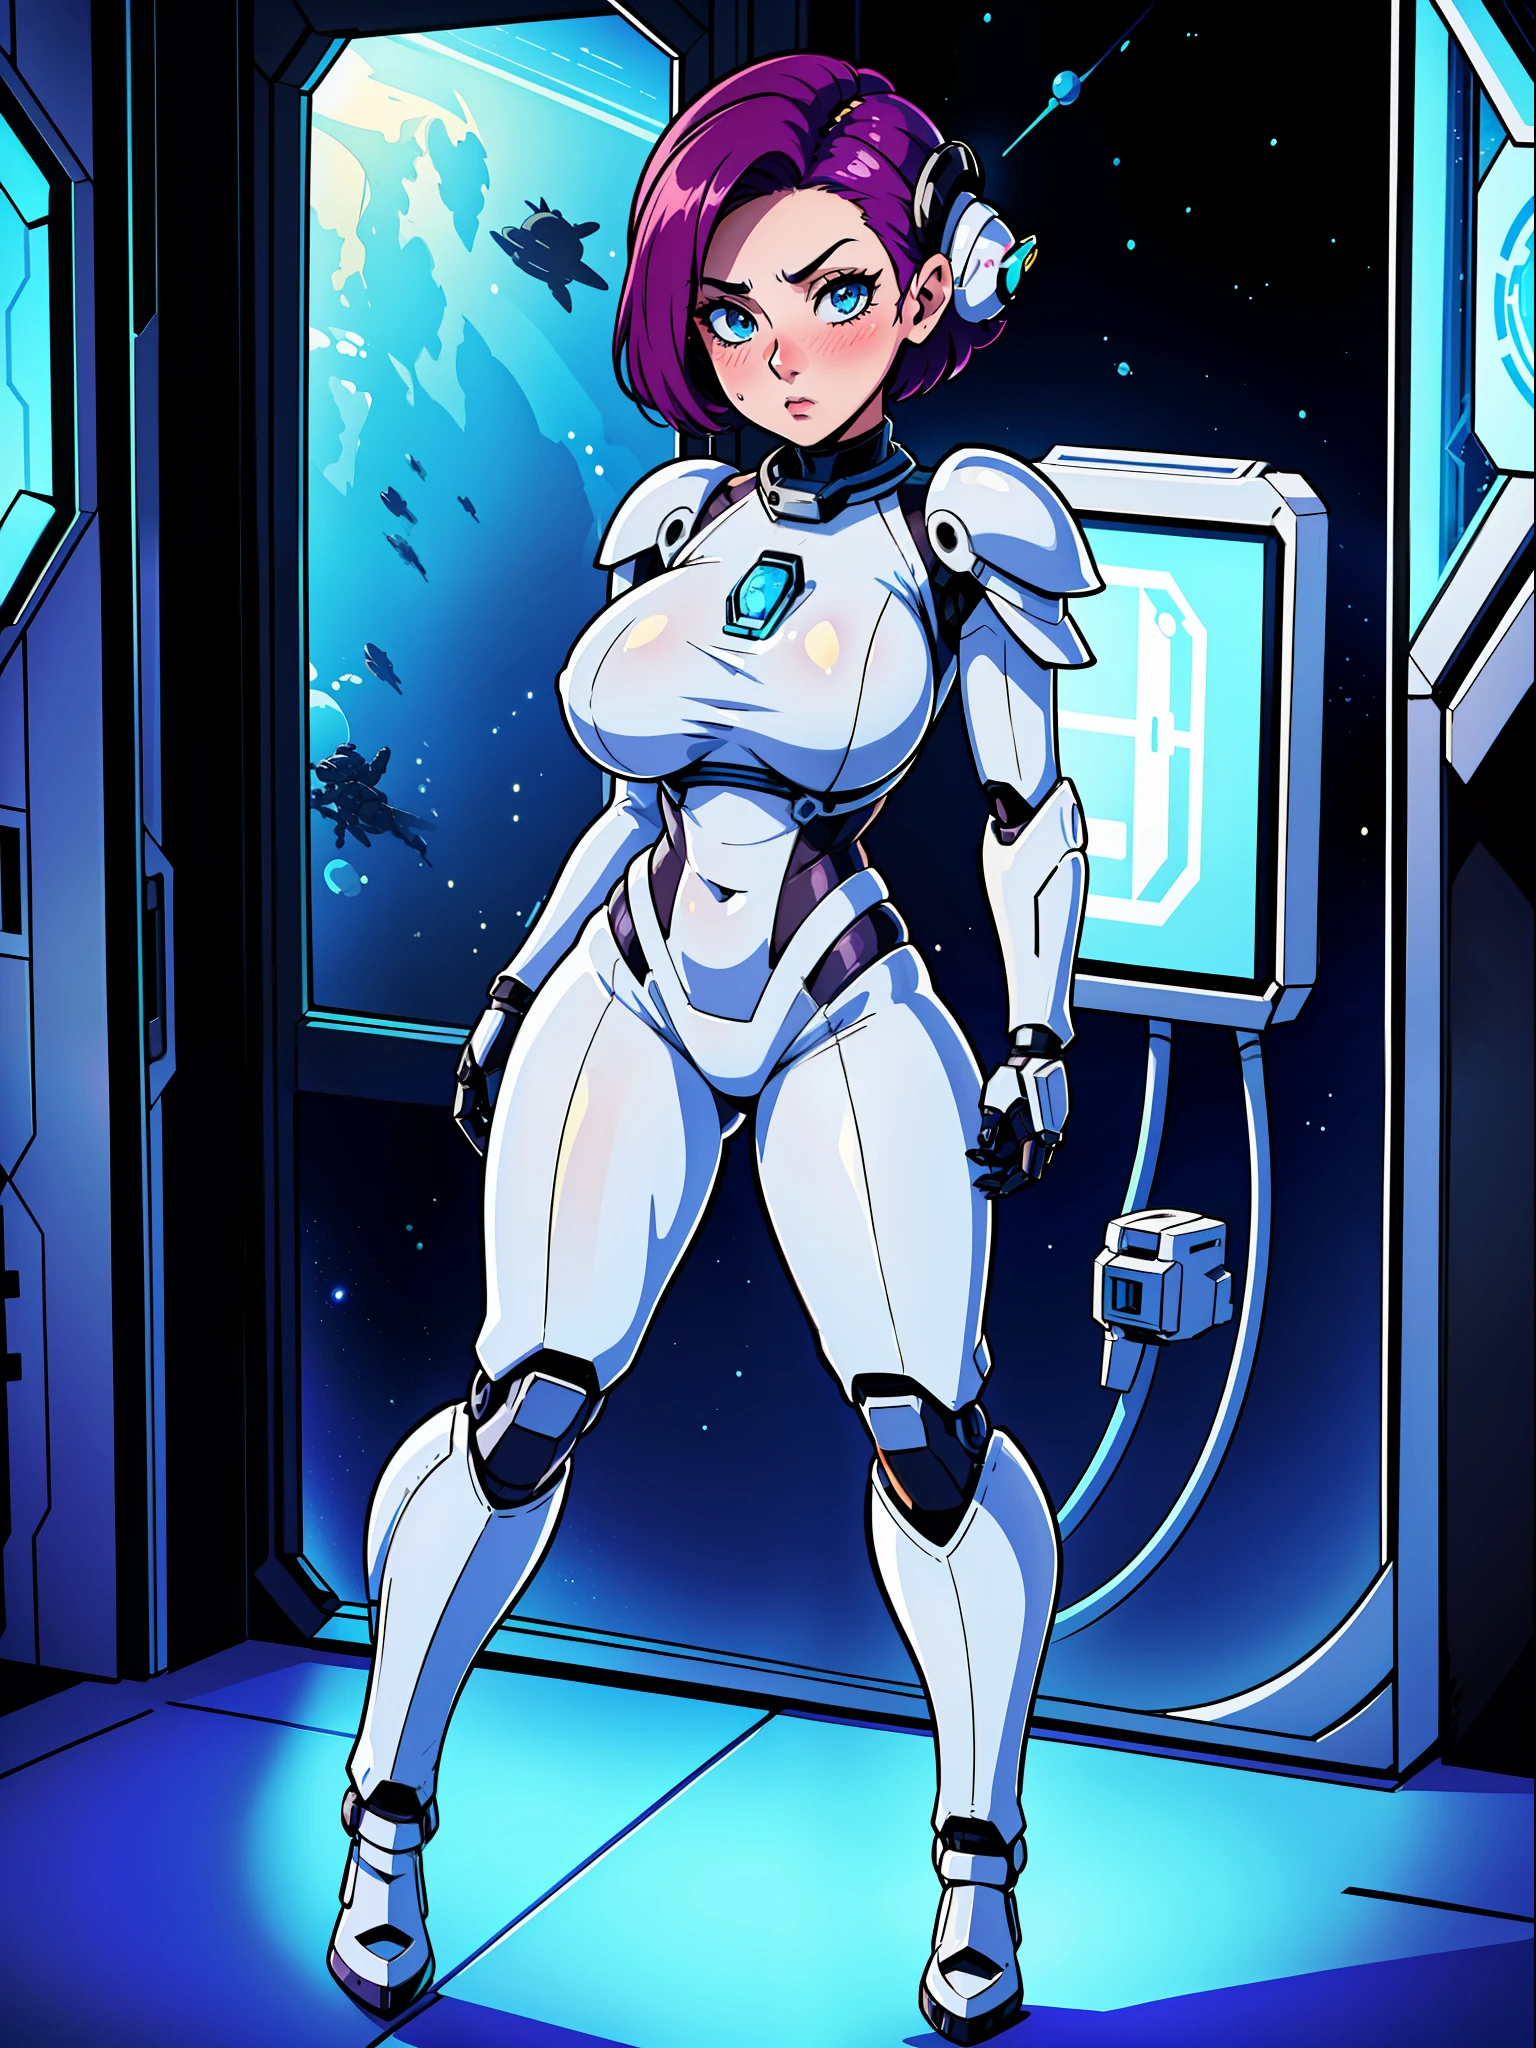 (full body photo:1.5), (one/woman/mechanic:1.5), (extremely large breasts:1.5), (all mechanical body:1.5), (with bionic armor:1.5), white with black gears, (she is inside a spaceship near the window seeing outer space:1.5), (she has very short purple straight hair:1.3), (blue eyes:1.3), (moaning:1.5), (blush:1.5), (is doing sensual poses standing up for the viewer:1.5),  anime style, Anime, 16k, high quality, textured skin, UHD, award-winning